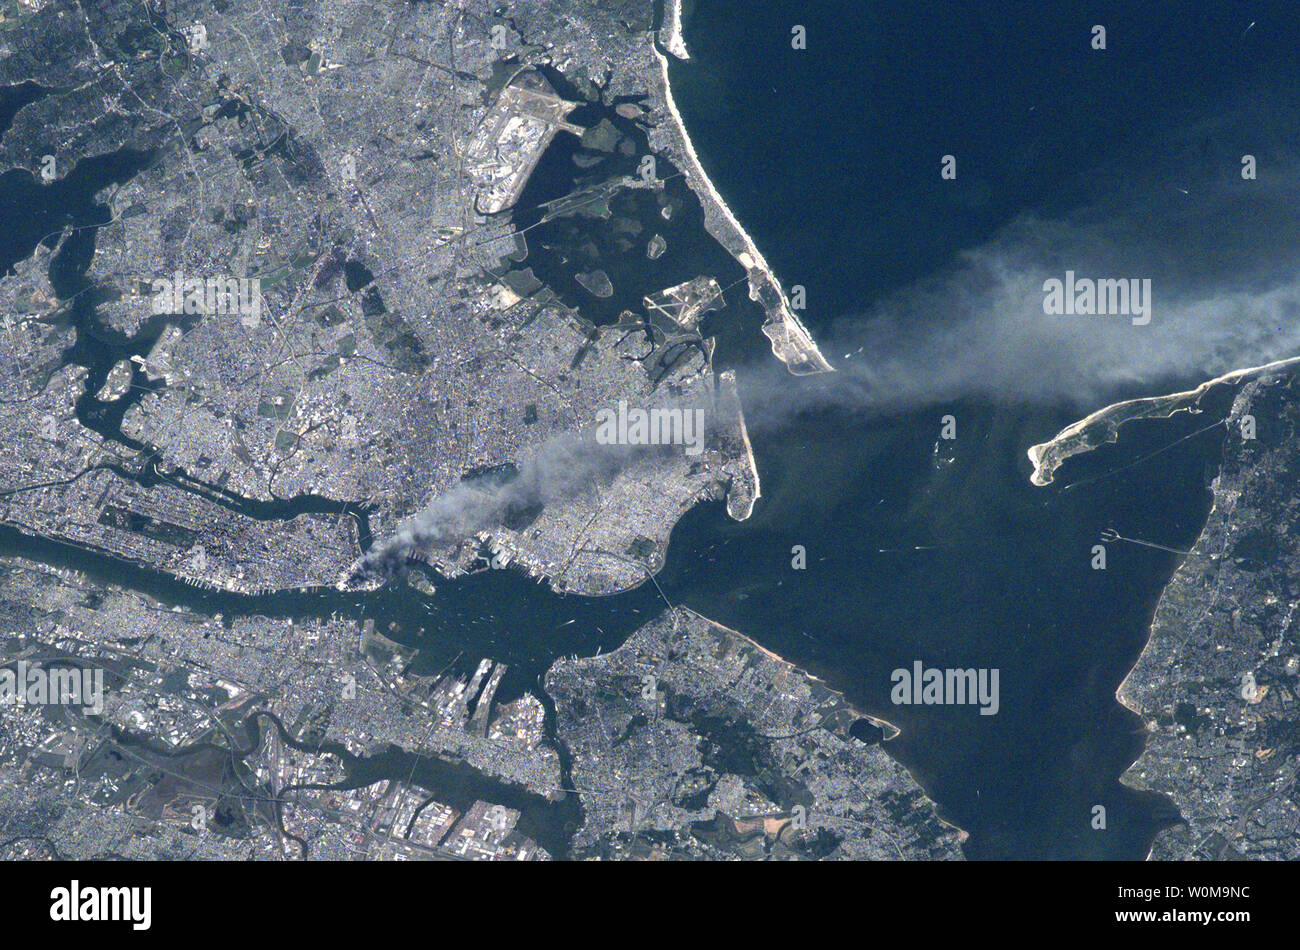 https://c8.alamy.com/comp/W0M9NC/this-image-is-one-of-a-series-taken-on-september-11-2001-that-shows-the-smoke-plume-rising-from-the-world-trade-center-towers-in-lower-manhattan-from-the-international-space-stations-expedition-3-crew-new-jersey-is-seen-in-the-lower-part-of-the-picture-and-the-upper-part-is-brookly-and-queens-boroughs-of-new-york-city-upi-photonasa-W0M9NC.jpg